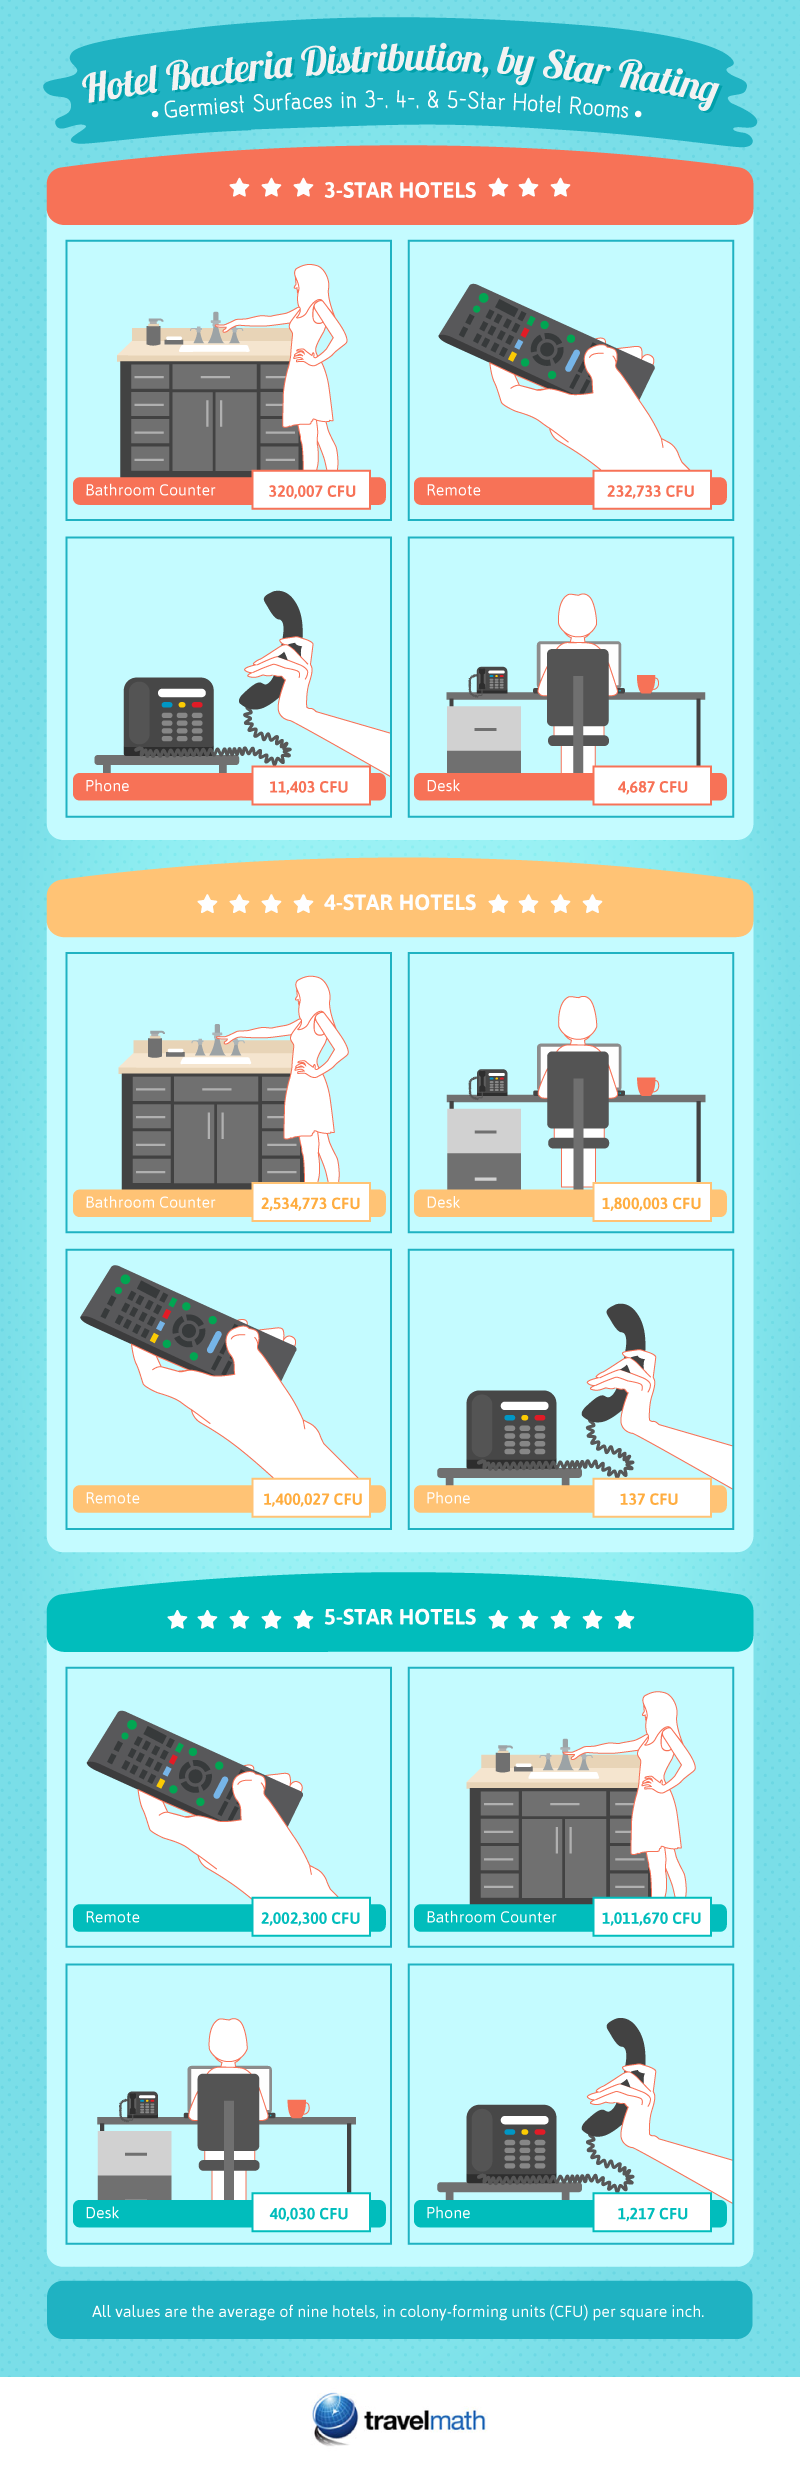 Hotel Bacteria Distribution by Star Rating - Germiest Surfaces in 3, 4, and 5-star Hotel Rooms